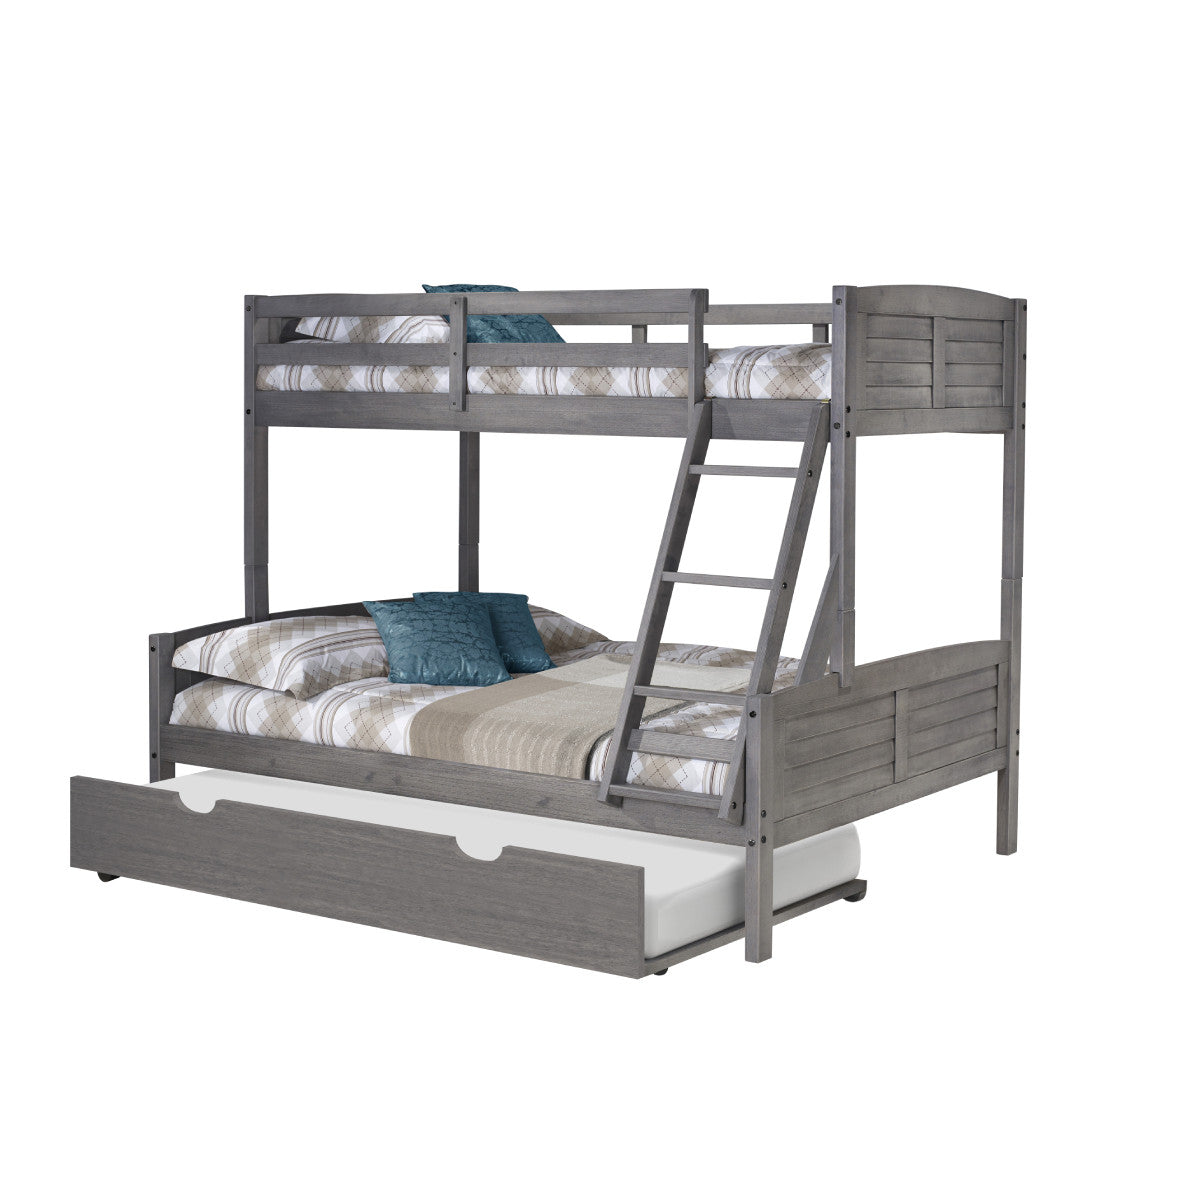 TWIN/FULL LOUVER BUNK BED WITH TWIN TRUNDLE BED IN ANTIQUE GREY FINISH